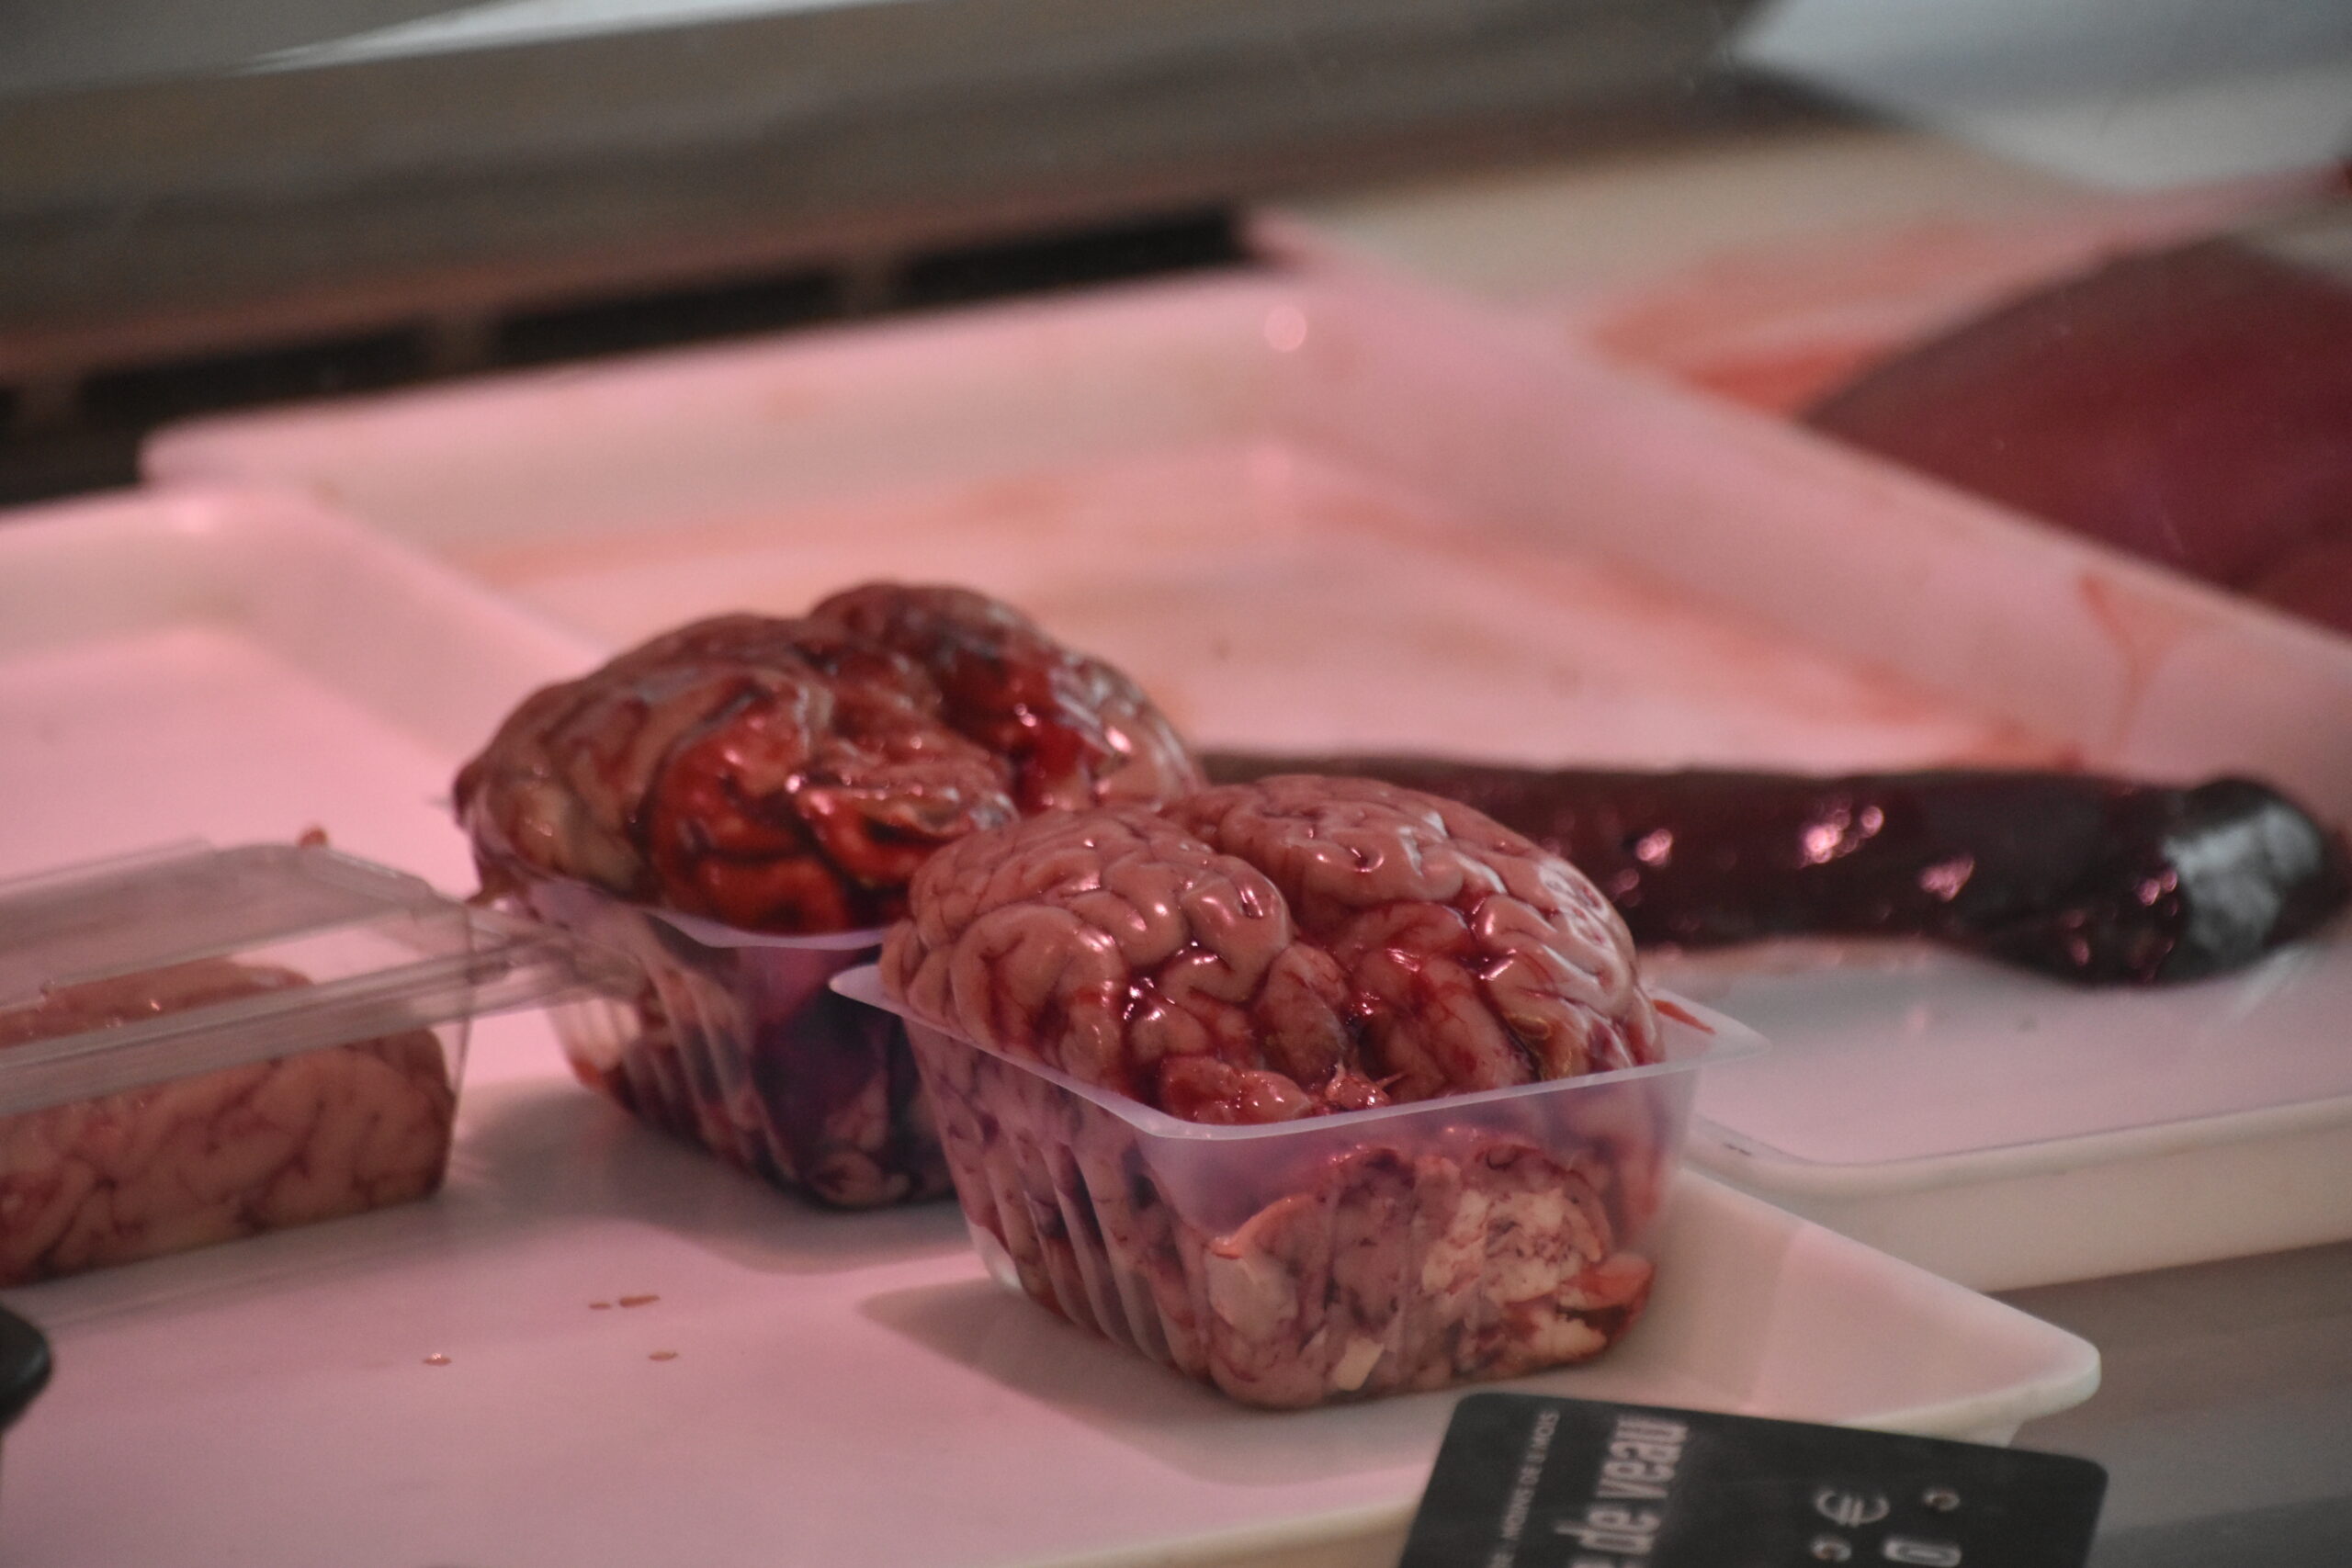 calf's brain sold in the market in Fontainebleau in France